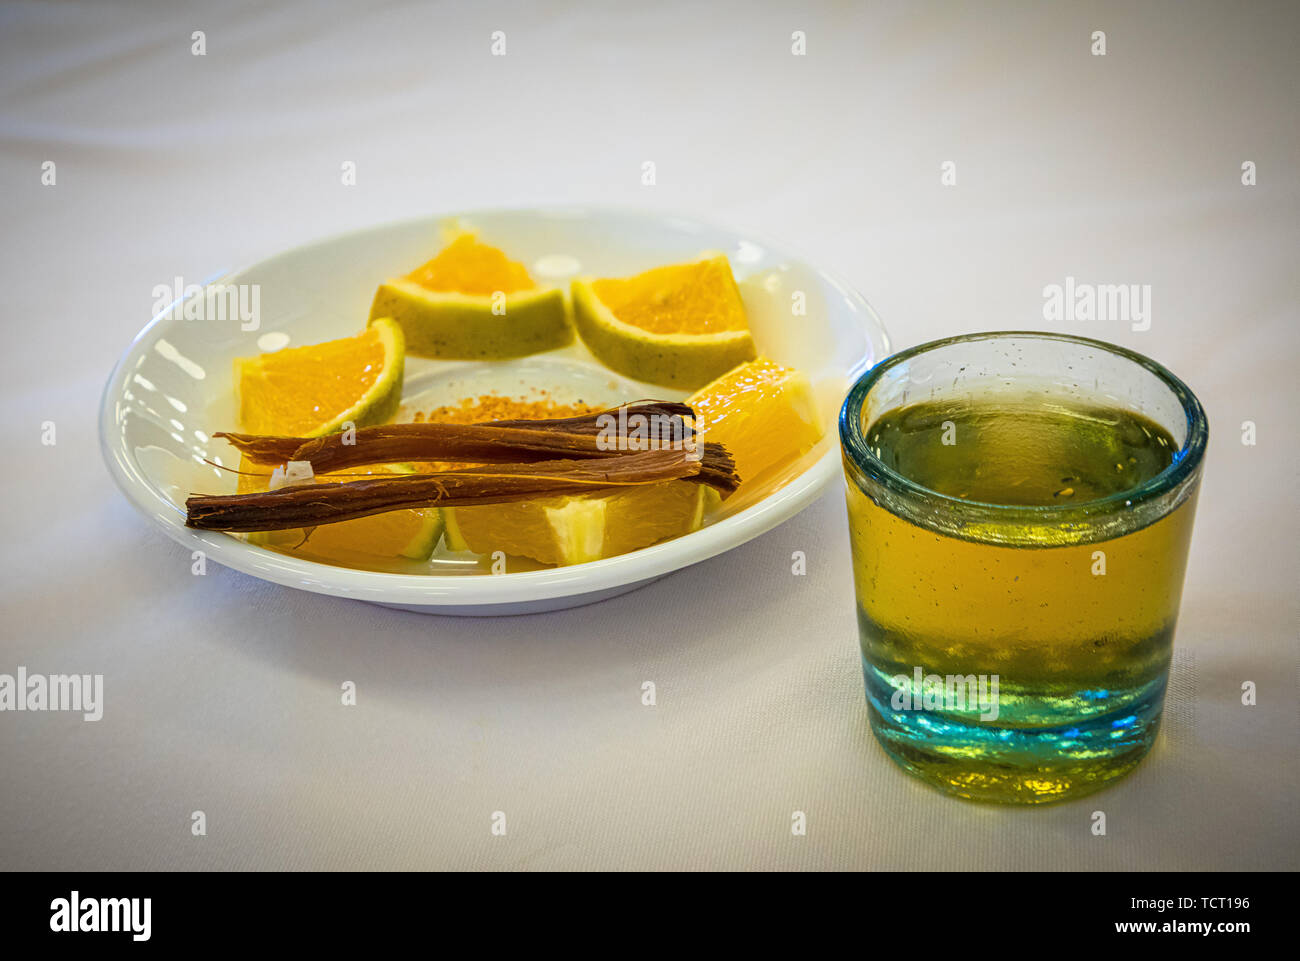 Mezcal or mescal is a distilled alcoholic beverage made from any type of agave. Stock Photo